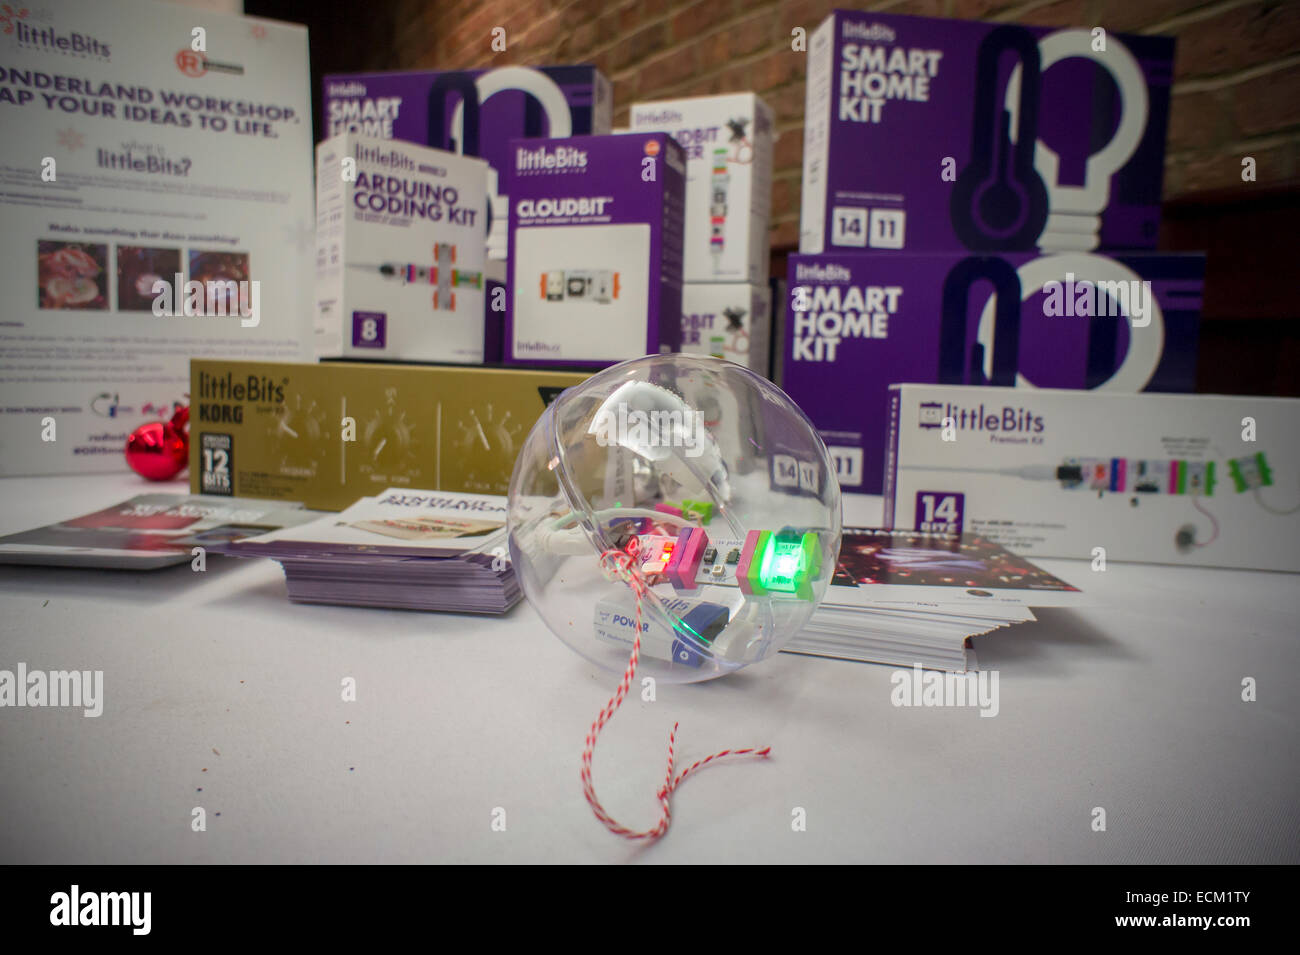 RadioShack sponsors a demonstration of LittleBits technology at an event in New York on Saturday, December 13, 2014. The retailer joined with LittleBits to promote the company's DIY kits which enable you to automate your household gadgets to connect to the 'Internet of Things' (IoT). Various modules connect together to turn your analog appliances into cloud connected smart appliances. RadioShack sells the devices hoping to reinvigorate itself as the go to place for DIY tech geeks. (© Richard B. Levine) Stock Photo